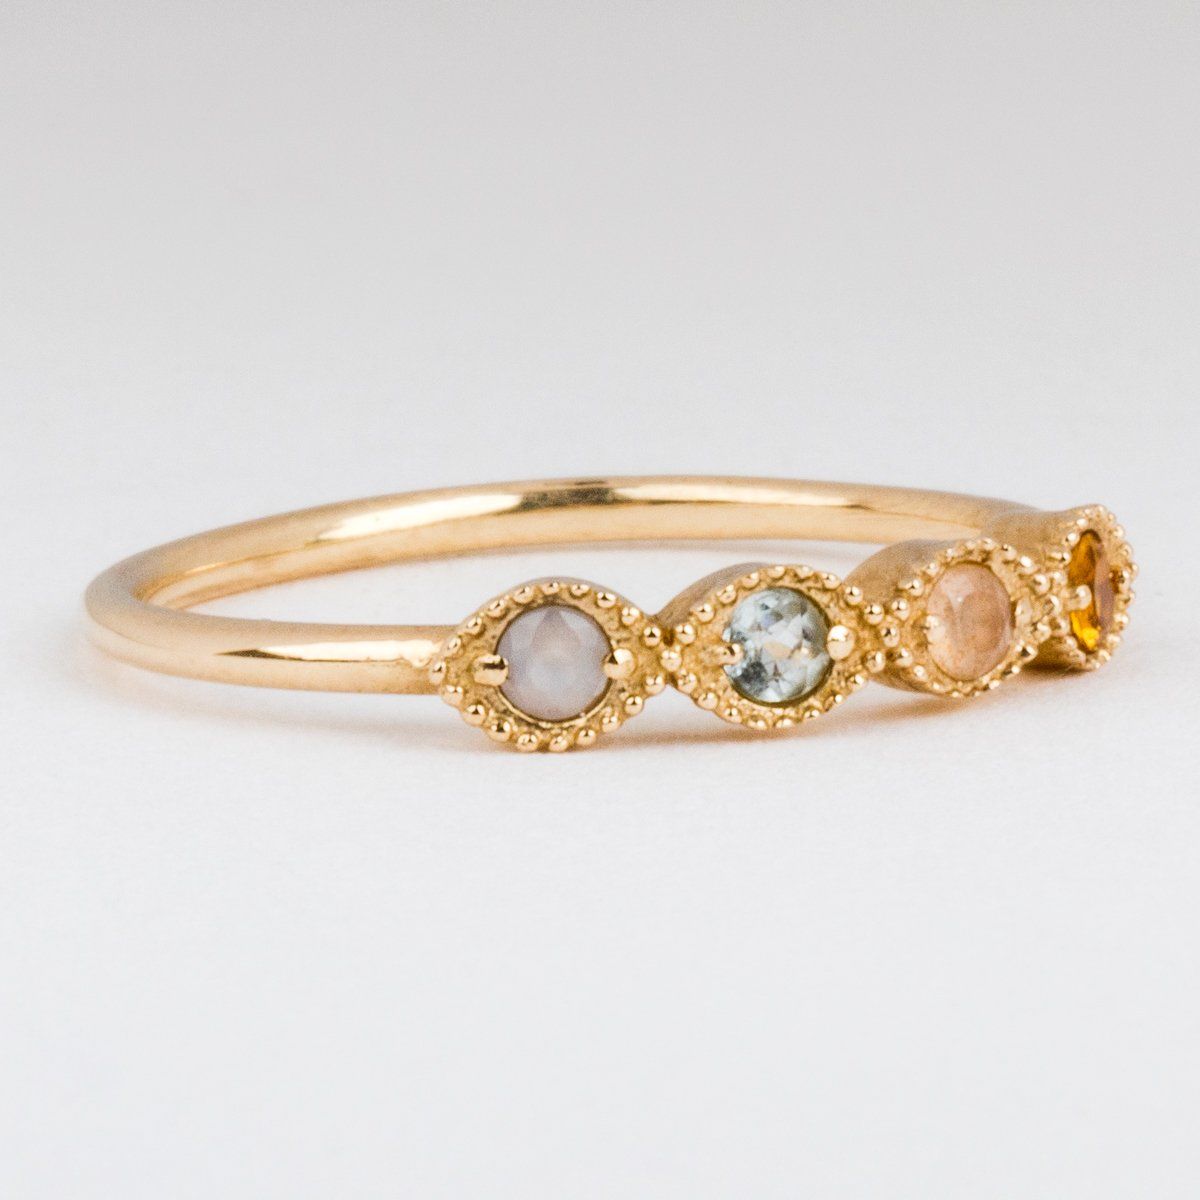 Pastel Earth Fire Water Wind Ring - rings - I Like it Here Club local eclectic